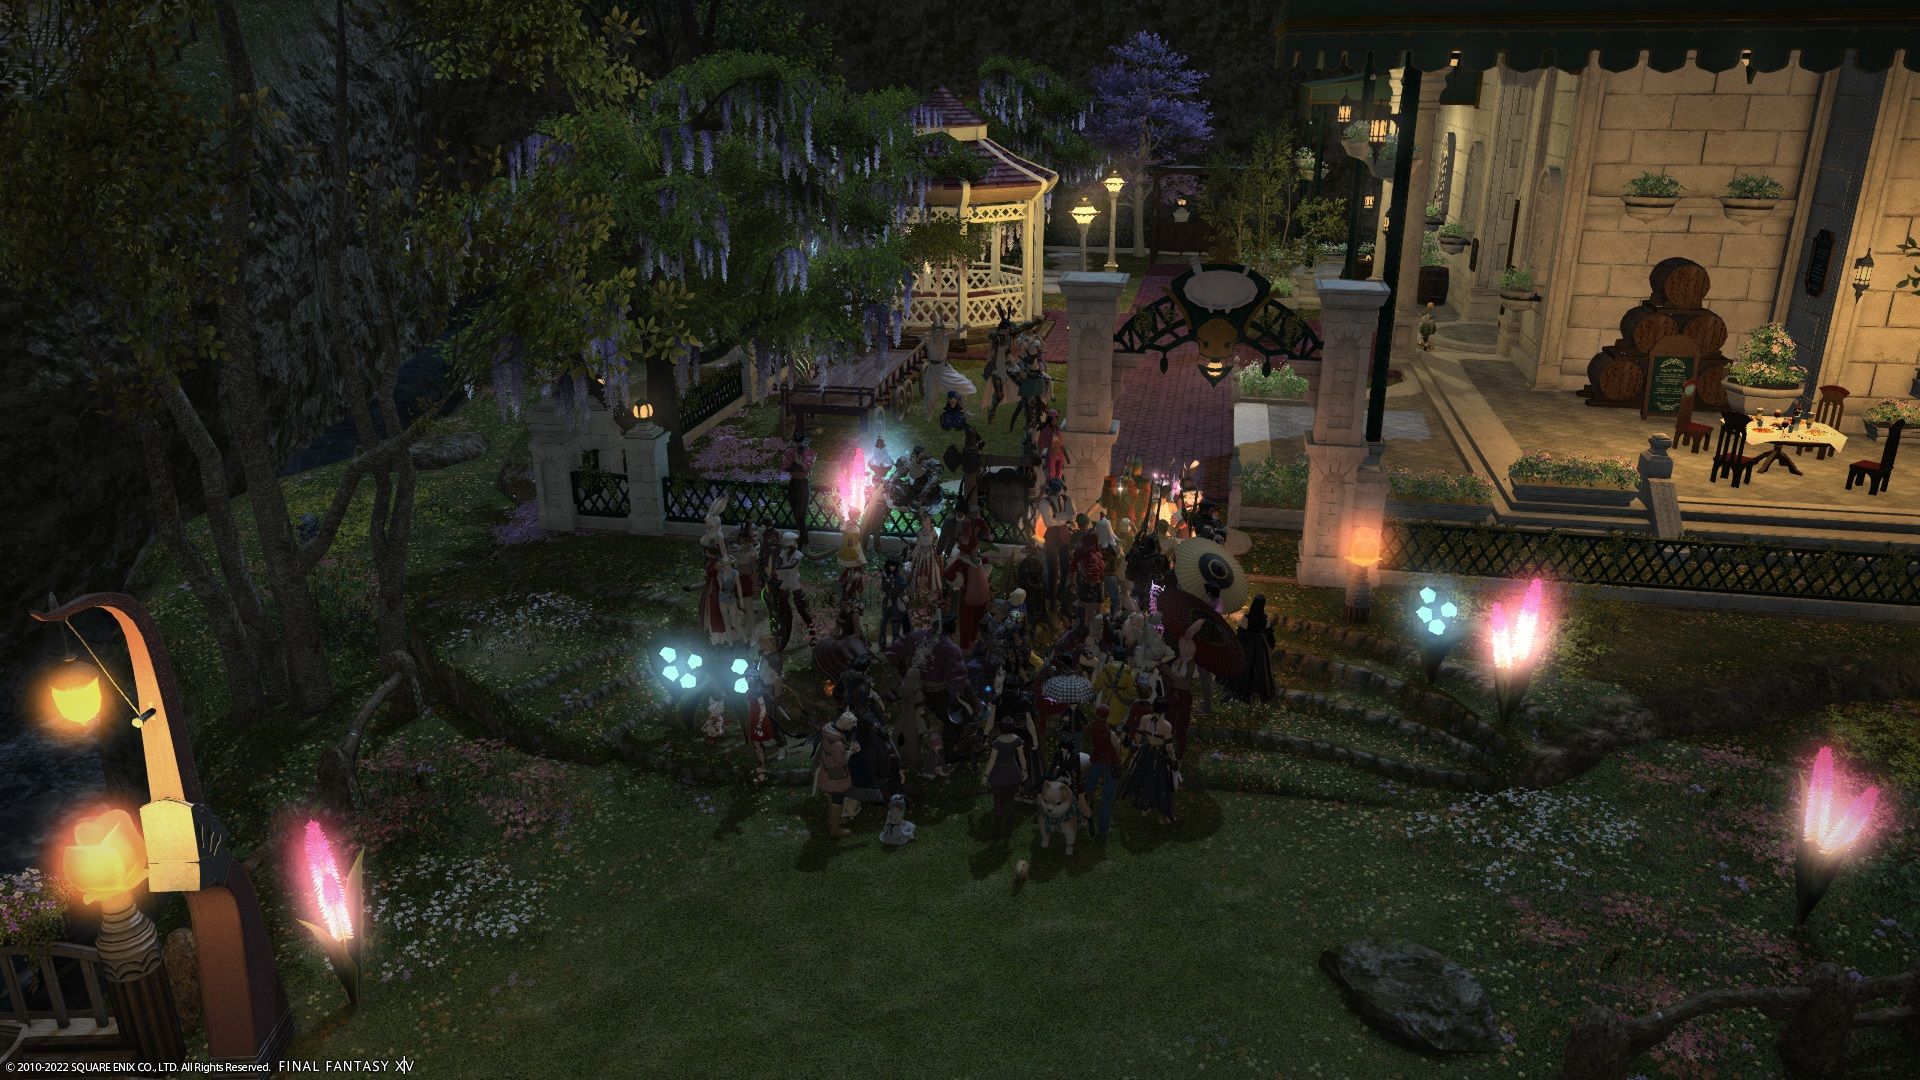 Final Fantasy 14 Lunarcon opening event that was so busy only one pocket of players appears at a time